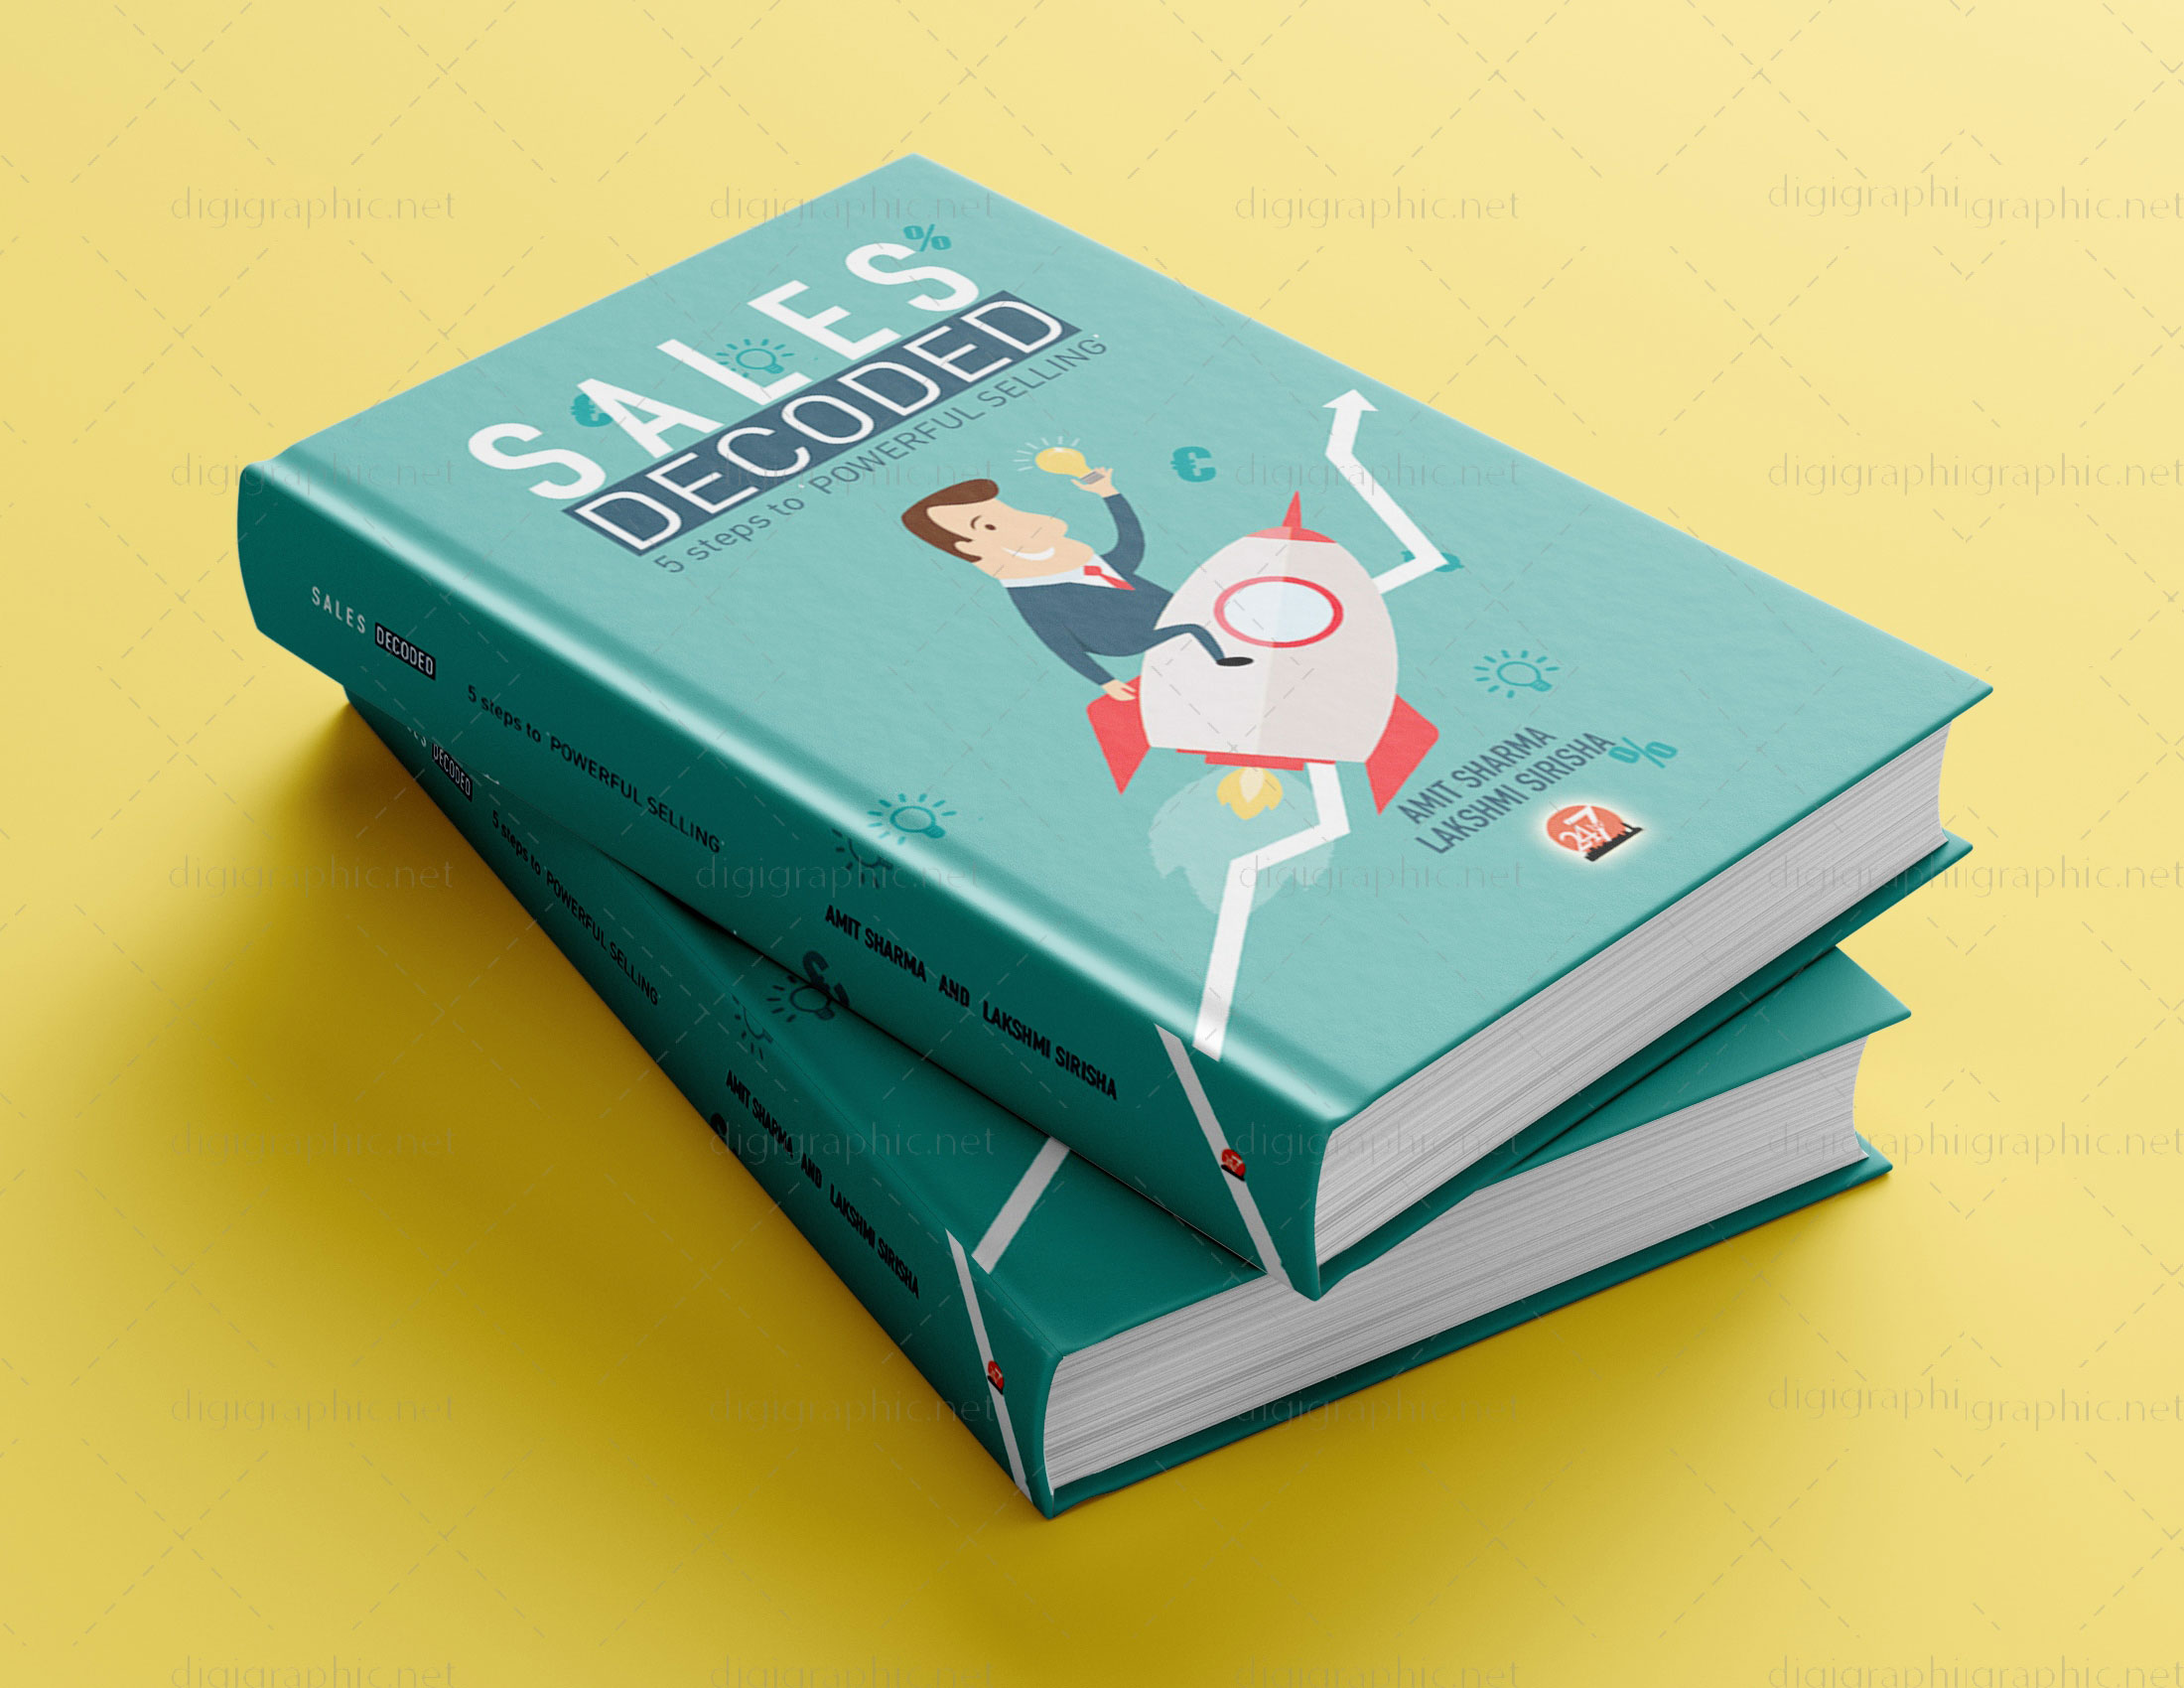 Download Photoshop Tutorial | How To Use Book Mockup